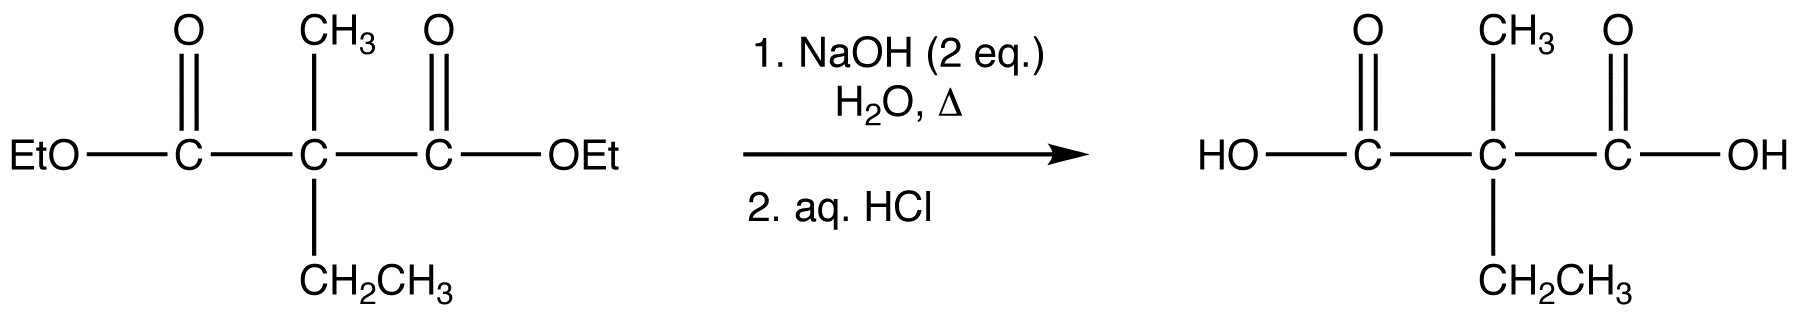 malonicestersynthesis16.png